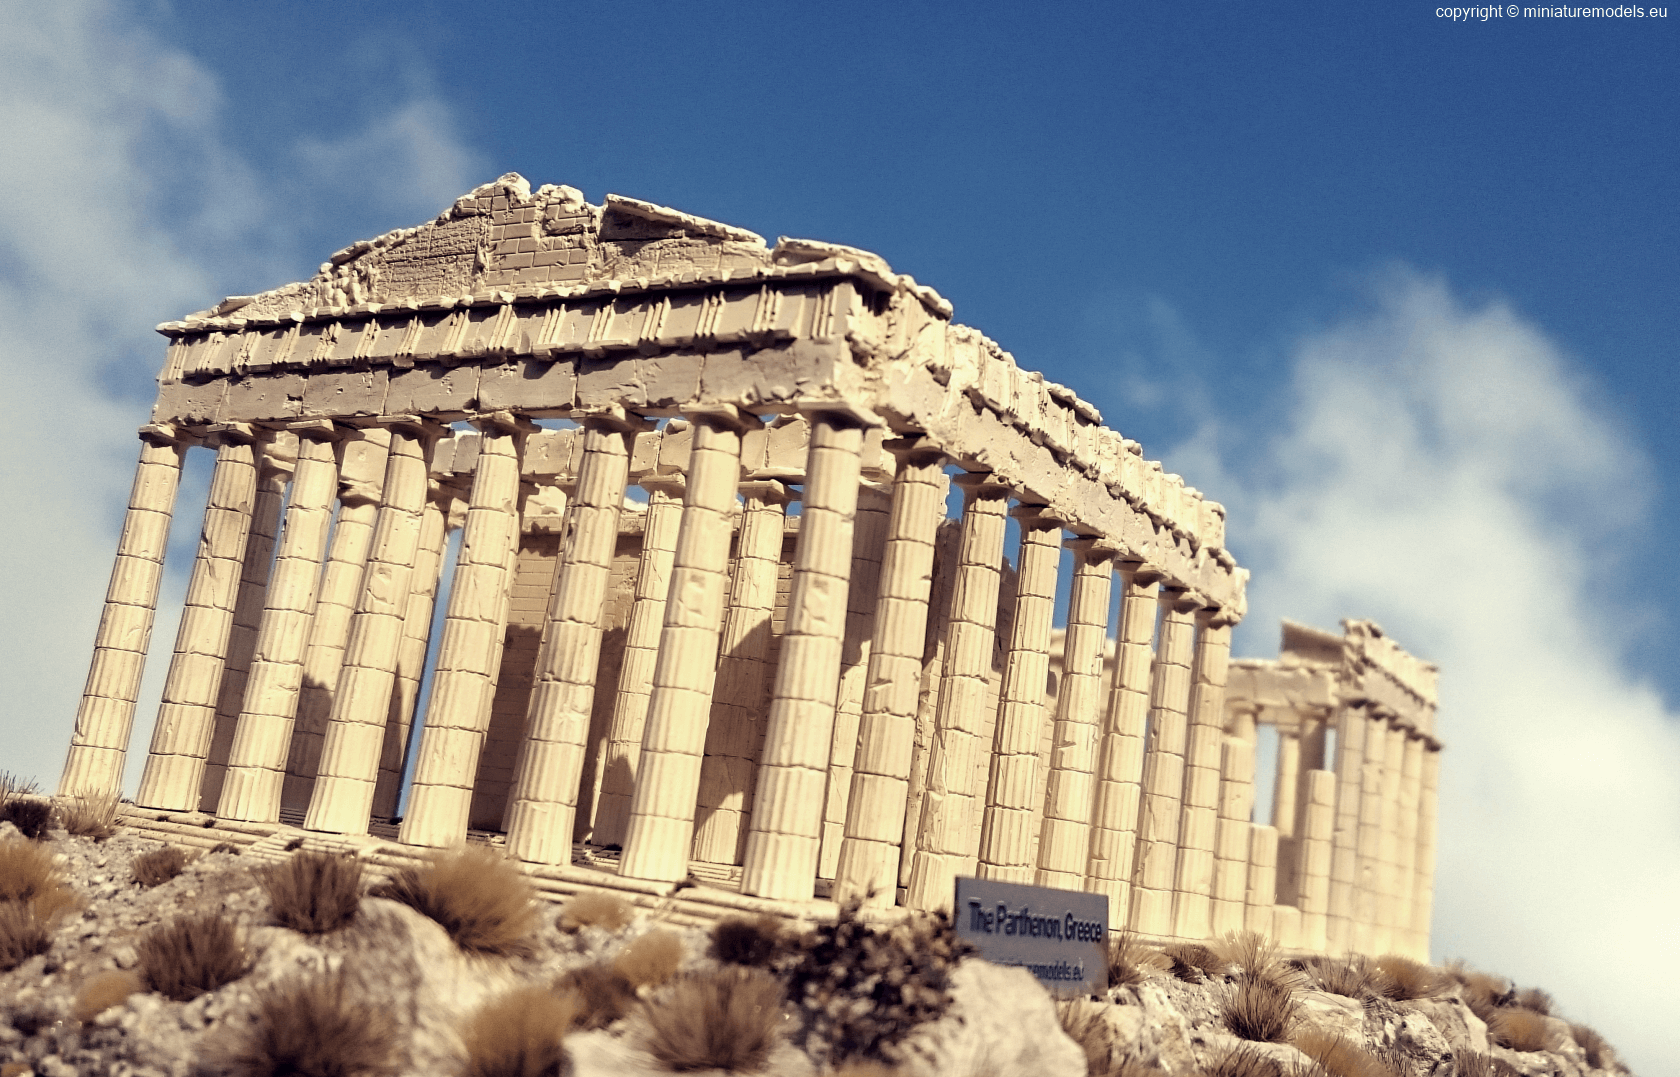 Parthenon diorama with sky and clouds